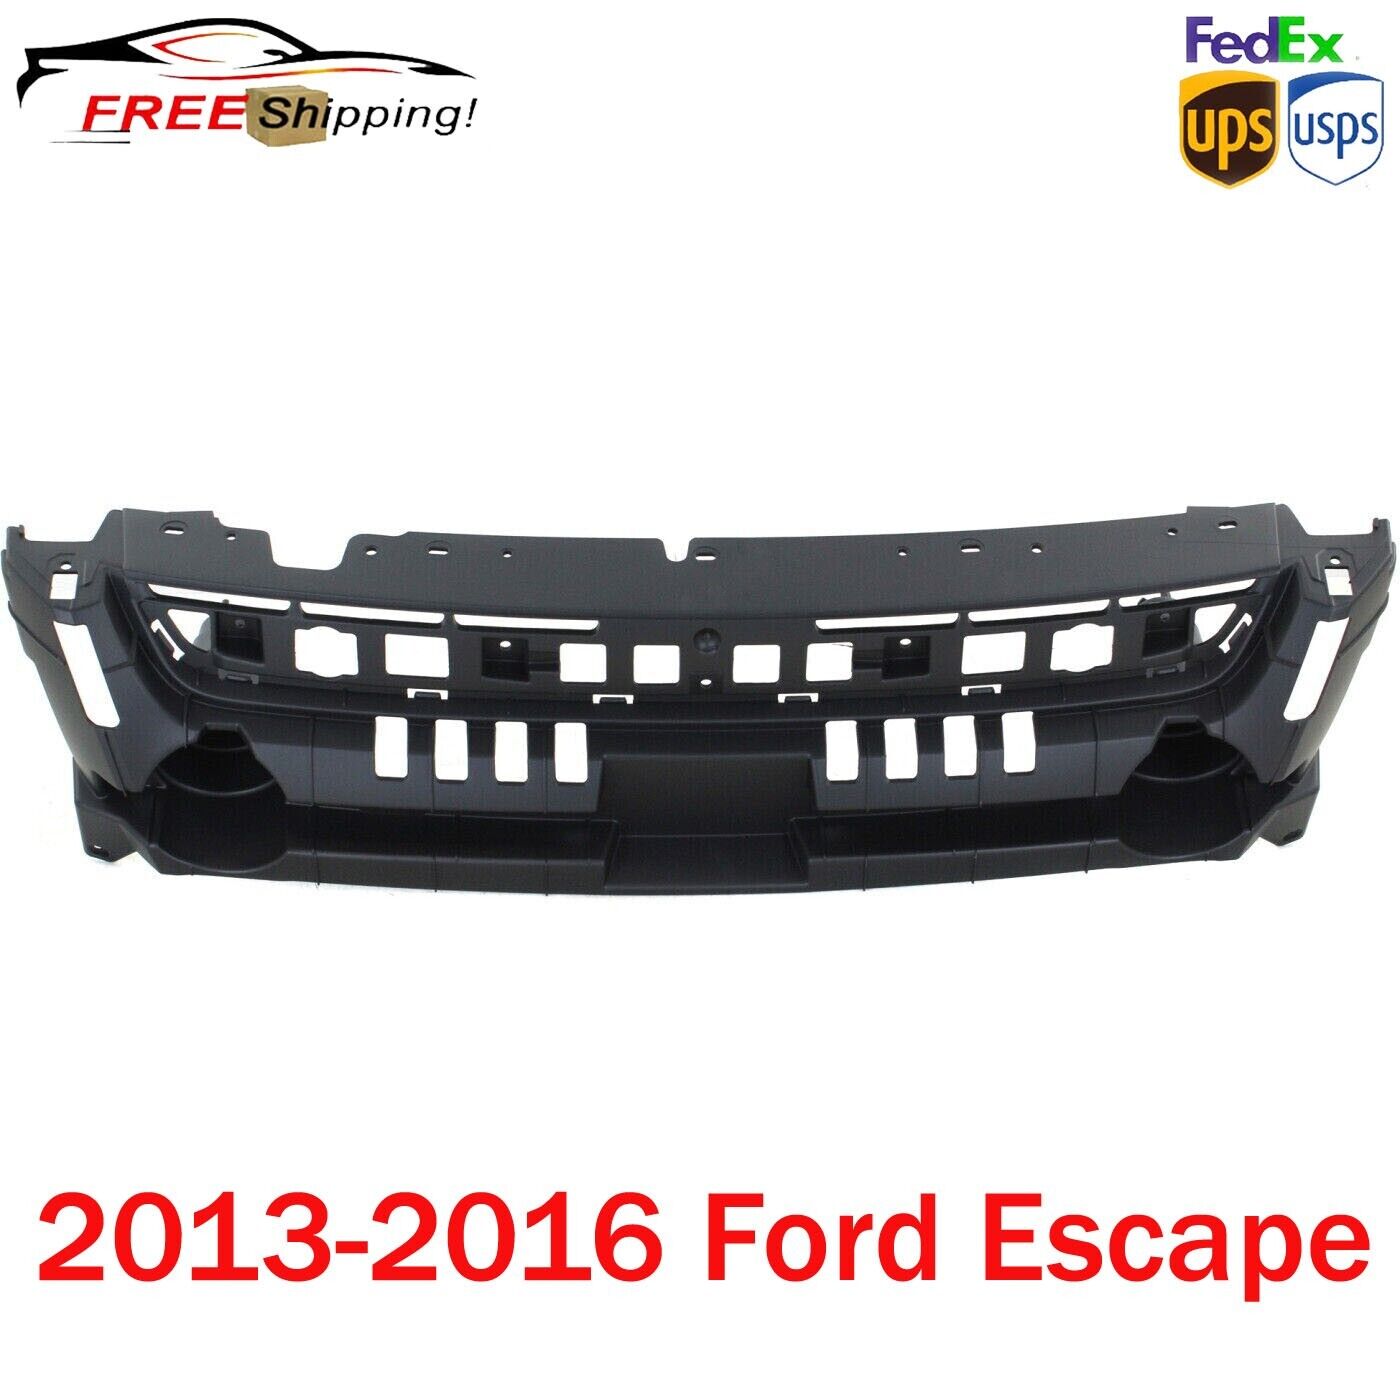 New Header Panel For 2013-2016 Ford Escape Grille Mounting Panel Plastic Black